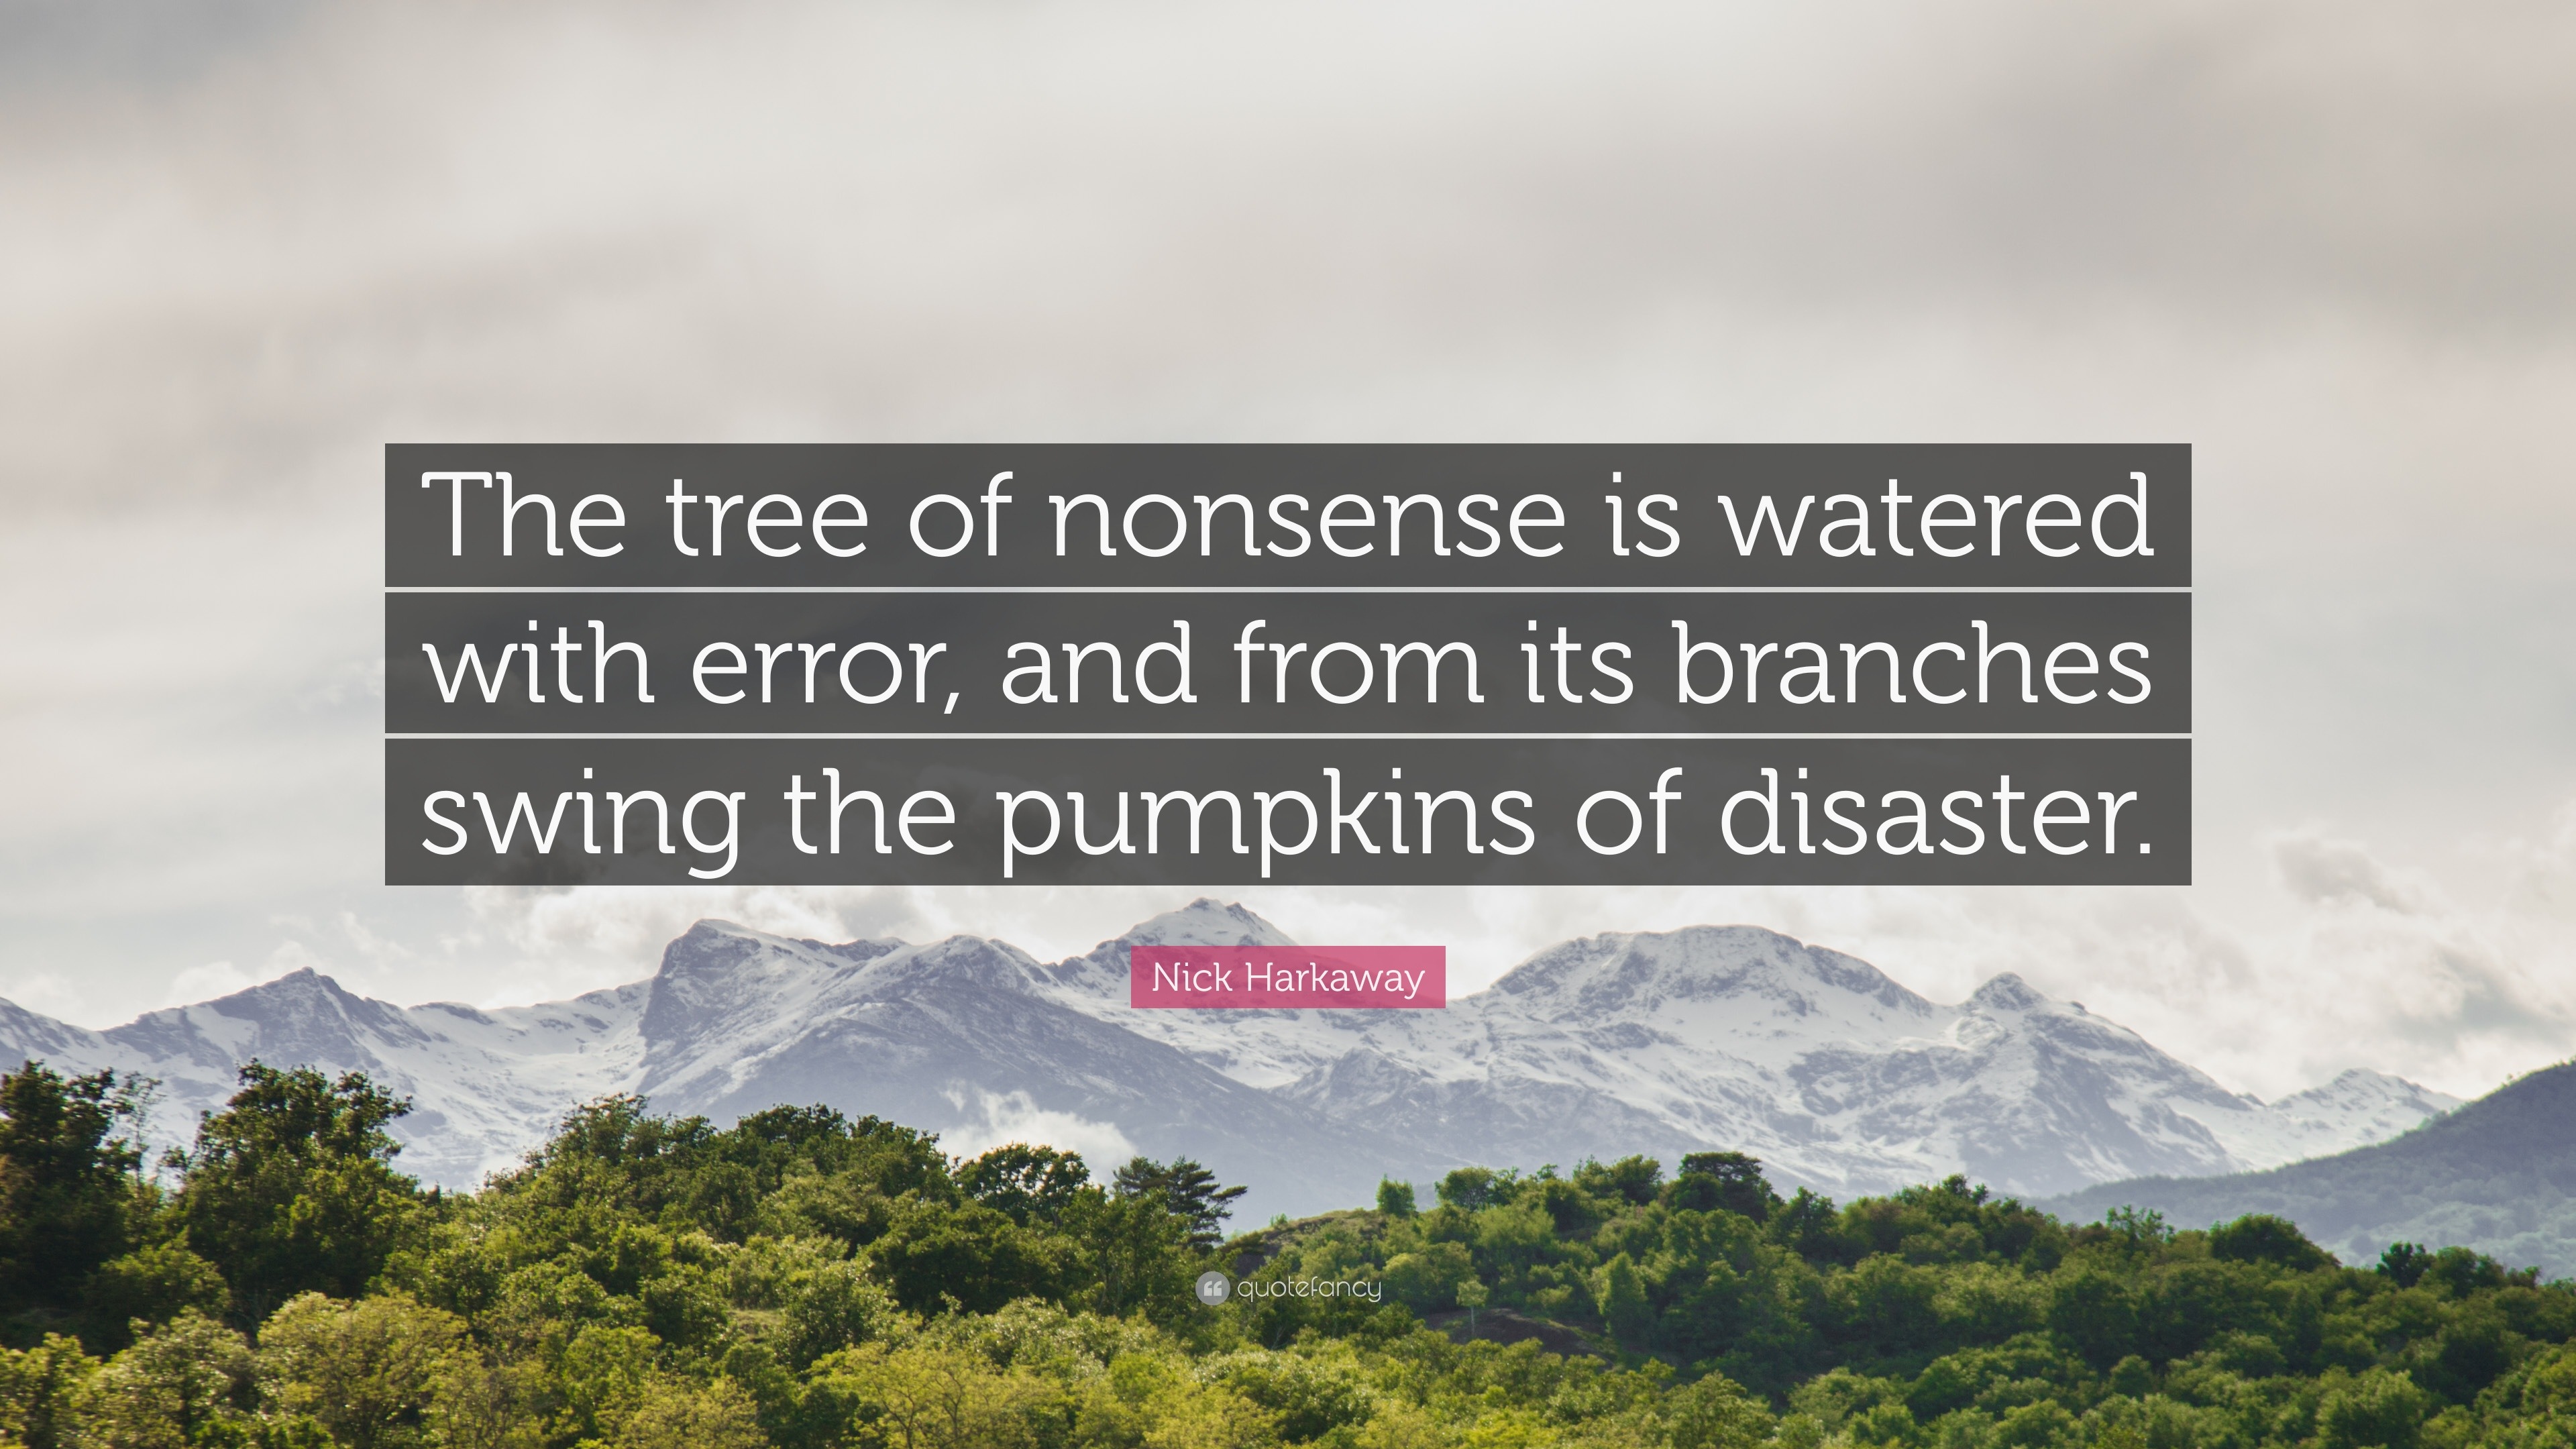 https://quotefancy.com/media/wallpaper/3840x2160/1296384-Nick-Harkaway-Quote-The-tree-of-nonsense-is-watered-with-error-and.jpg